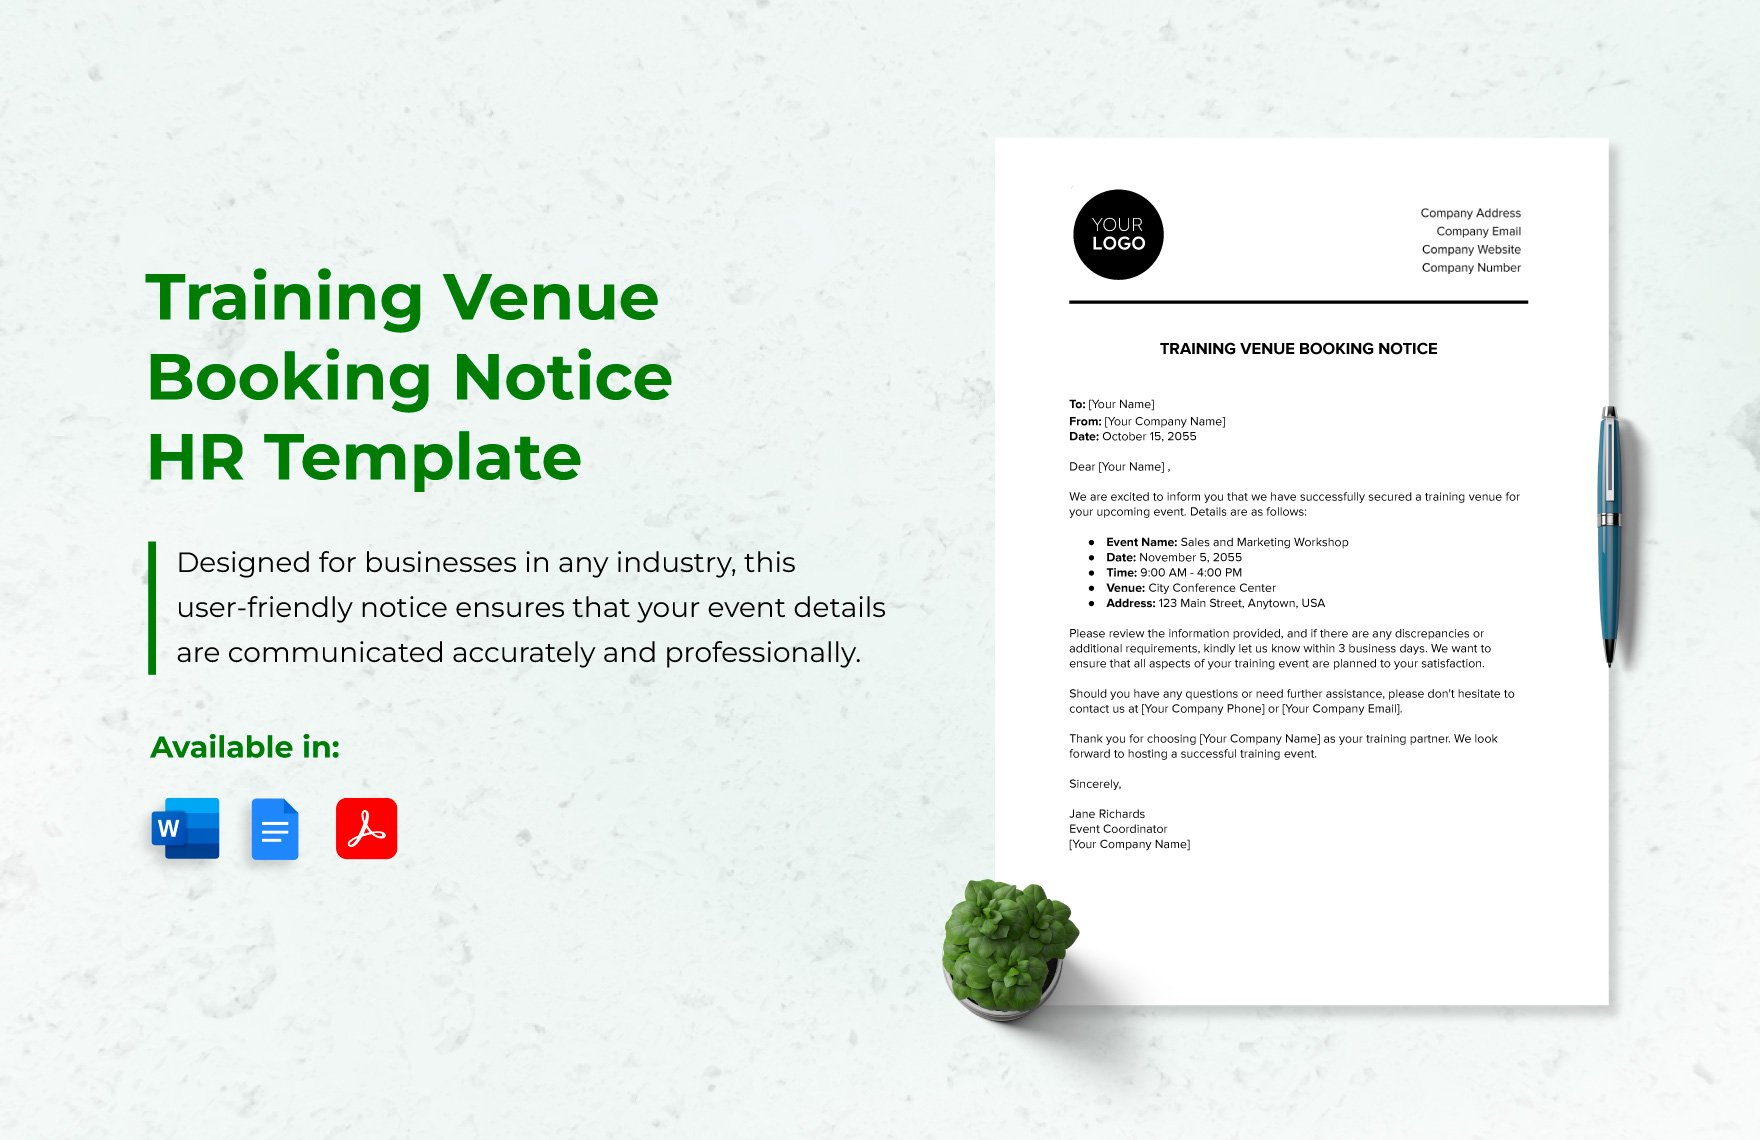 Training Venue Booking Notice HR Template in Word, Google Docs, PDF